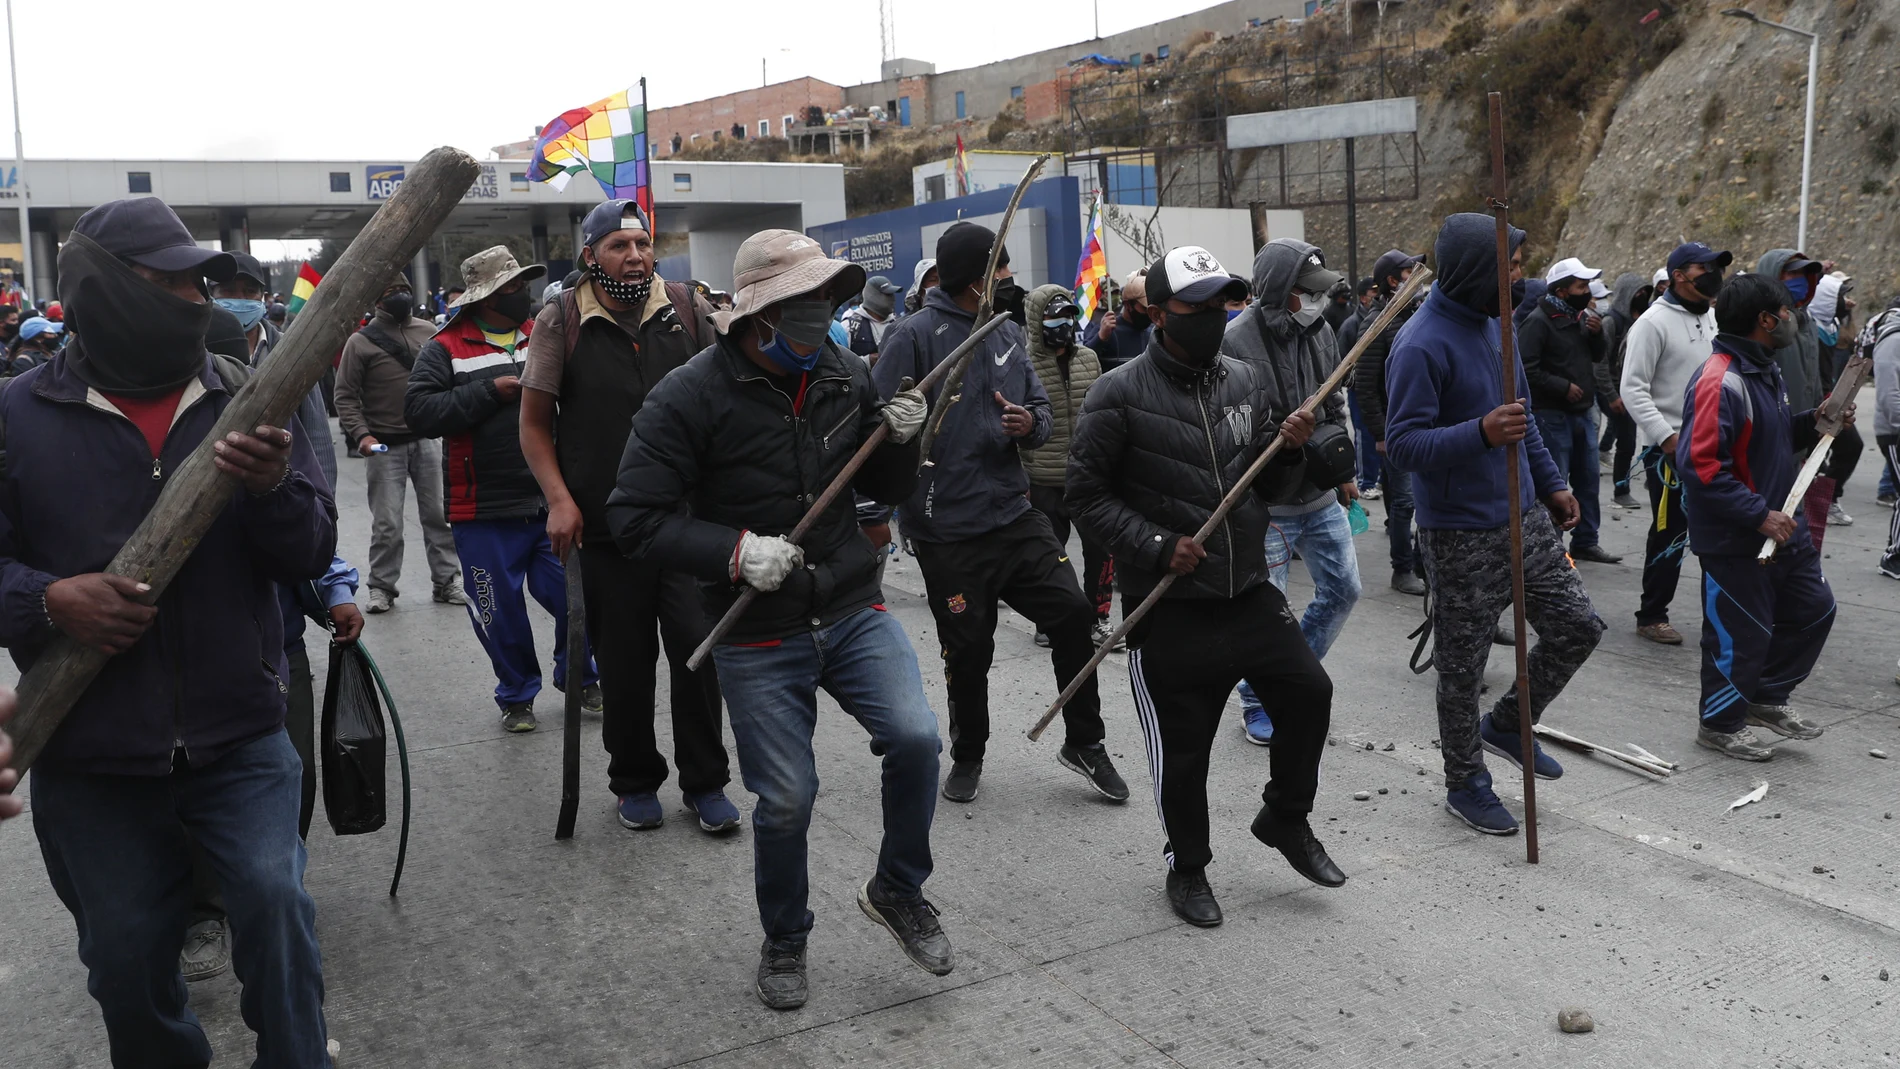 Demonstrators form up during a protest against the postponement of the presidential election, in El Alto, Bolivia, Tuesday, Aug. 11, 2020. Citing the ongoing new coronavirus pandemic, Bolivia's highest electoral authority delayed presidential elections from Sept. 6 to Oct. 18, the third time the vote has been delayed. (AP Photo/Juan Karita)